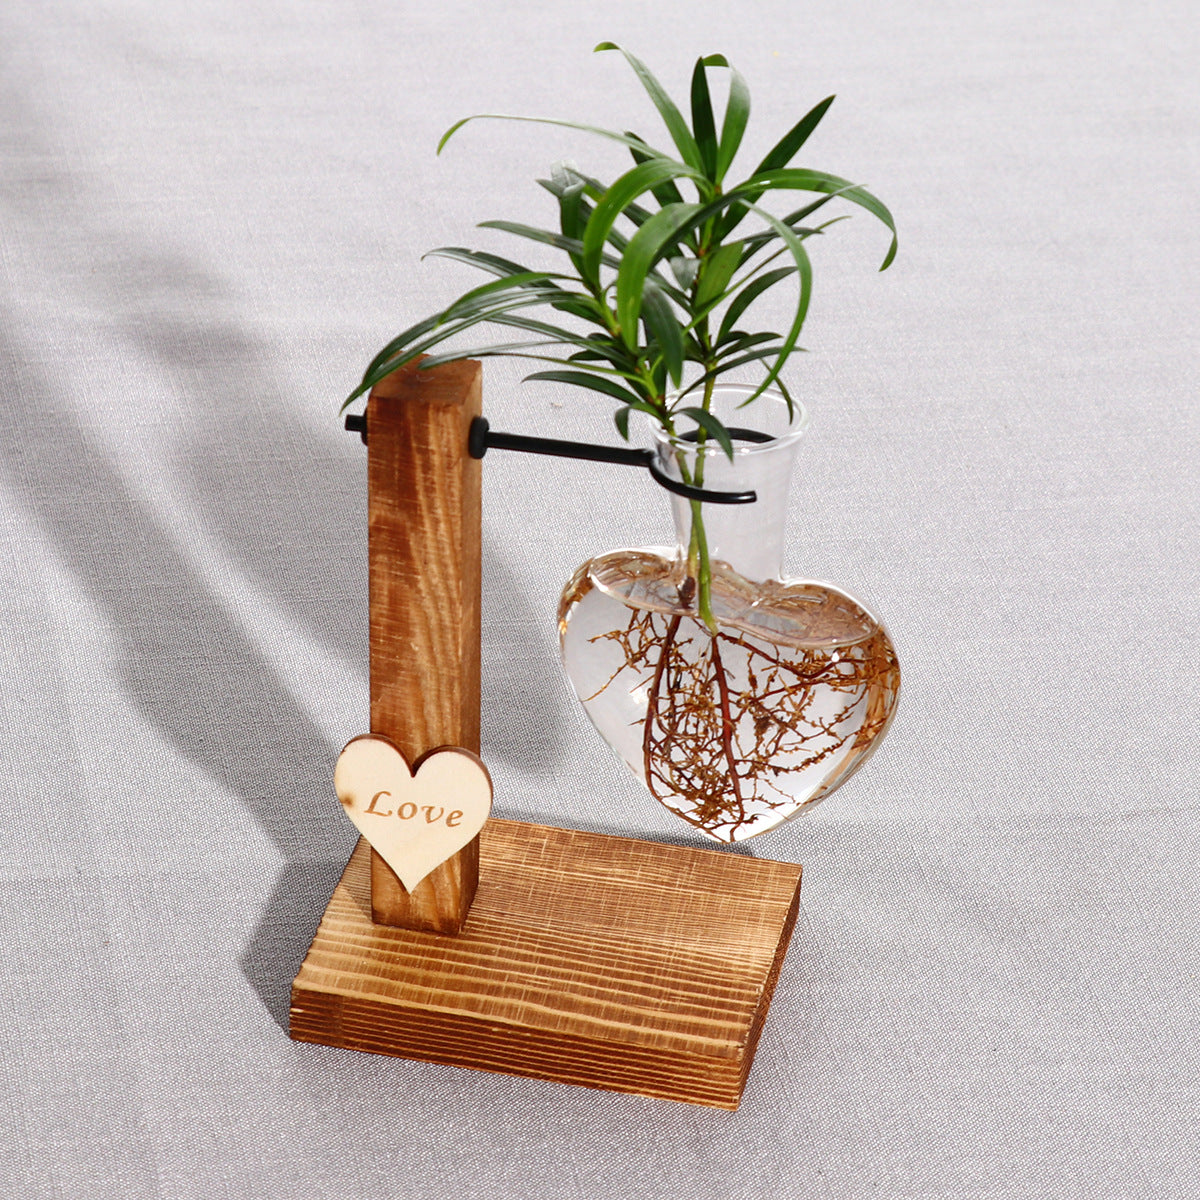 Solid Wood and Hydroponic Plante Vase - woodybeingllc